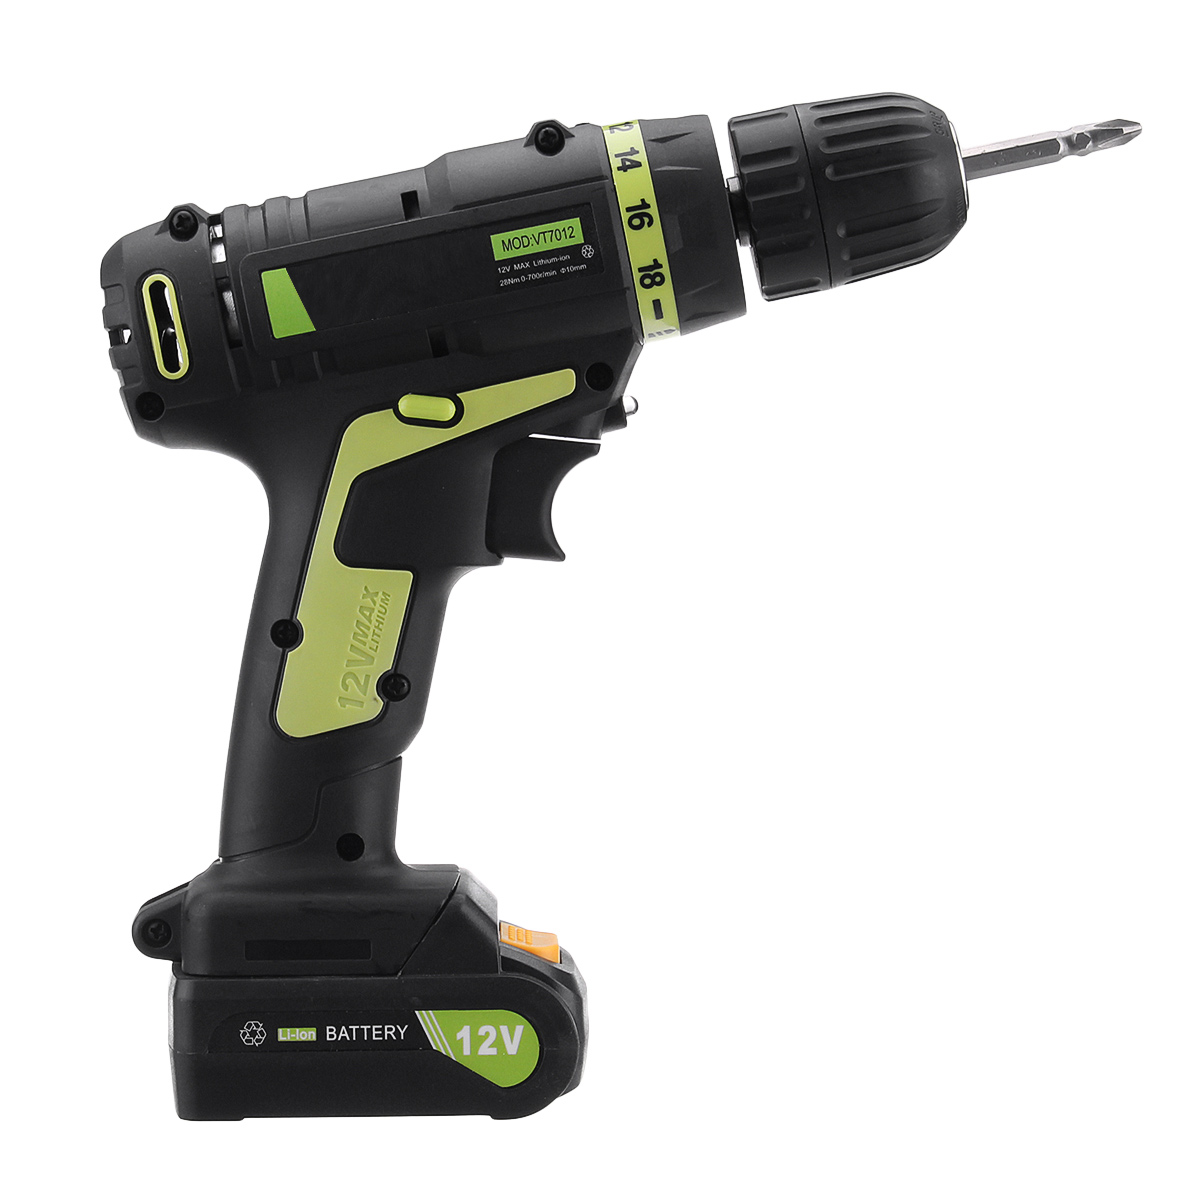 VOTO-AC100-240V-DC12V-Cordless-Rechargeable--Electric-Screwdriver-Li-ion-Battery-Power-Scew-Driver-1305287-5